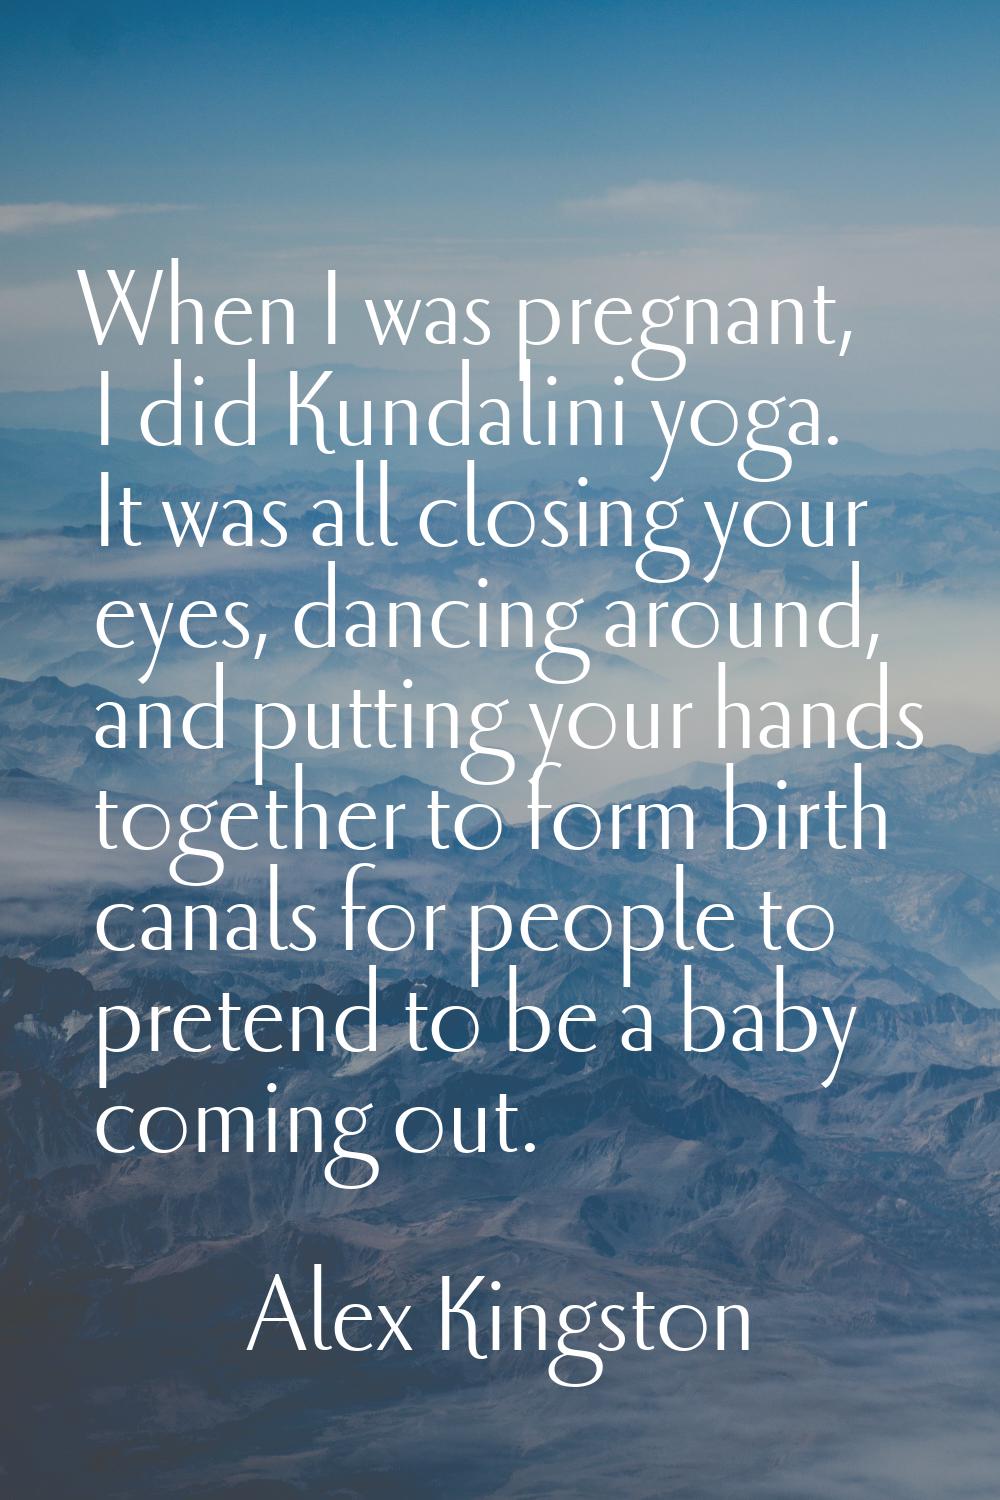 When I was pregnant, I did Kundalini yoga. It was all closing your eyes, dancing around, and puttin